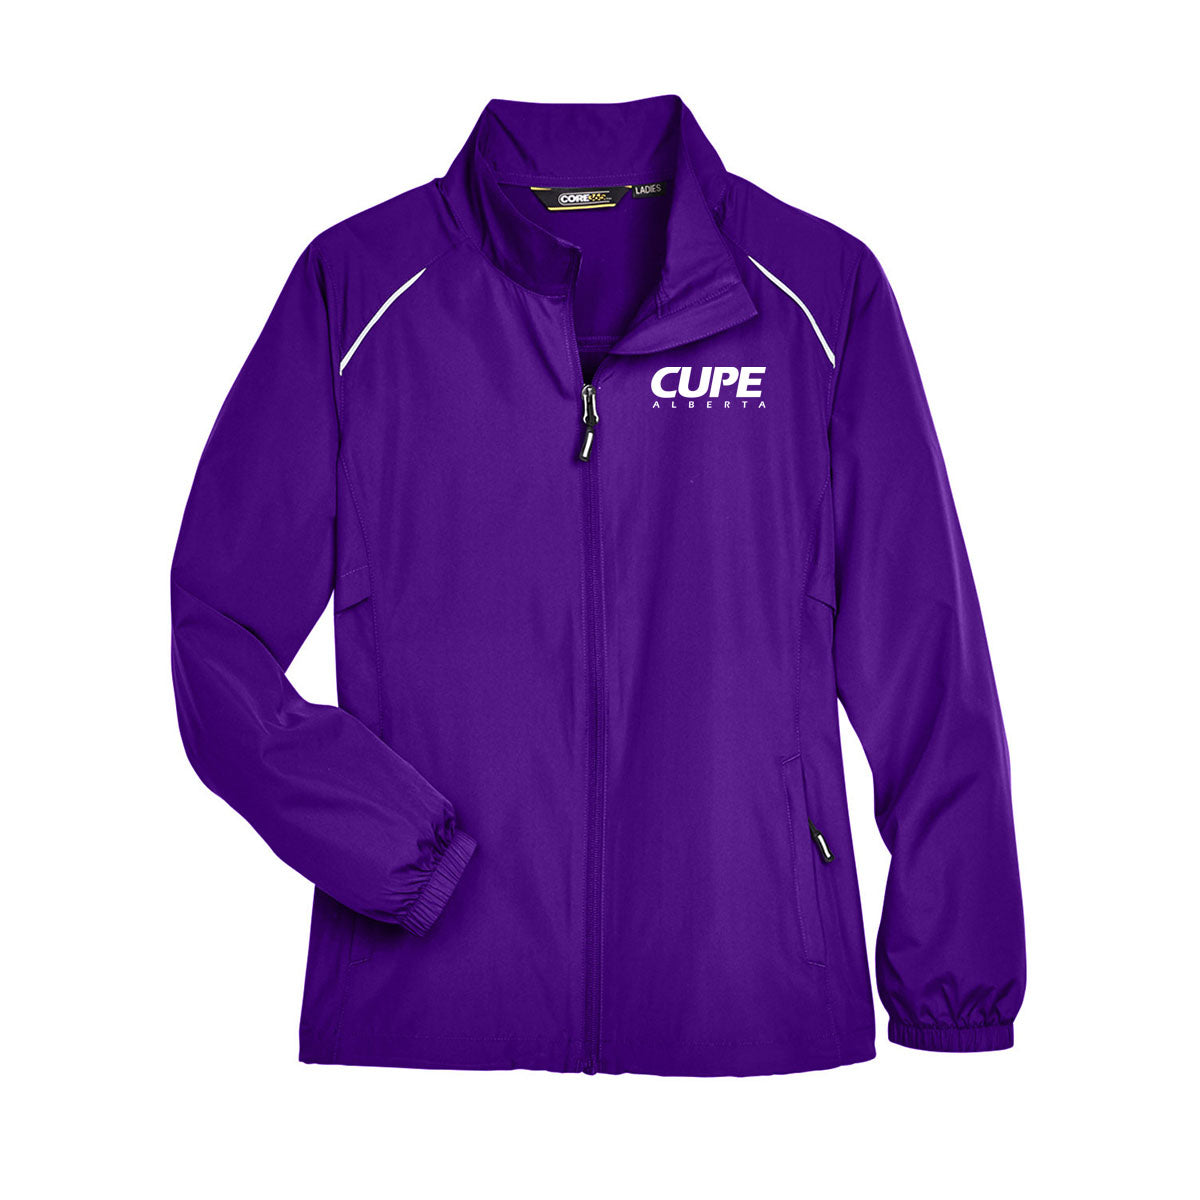 CUPE Alberta Ladies Soft Shell Jackets